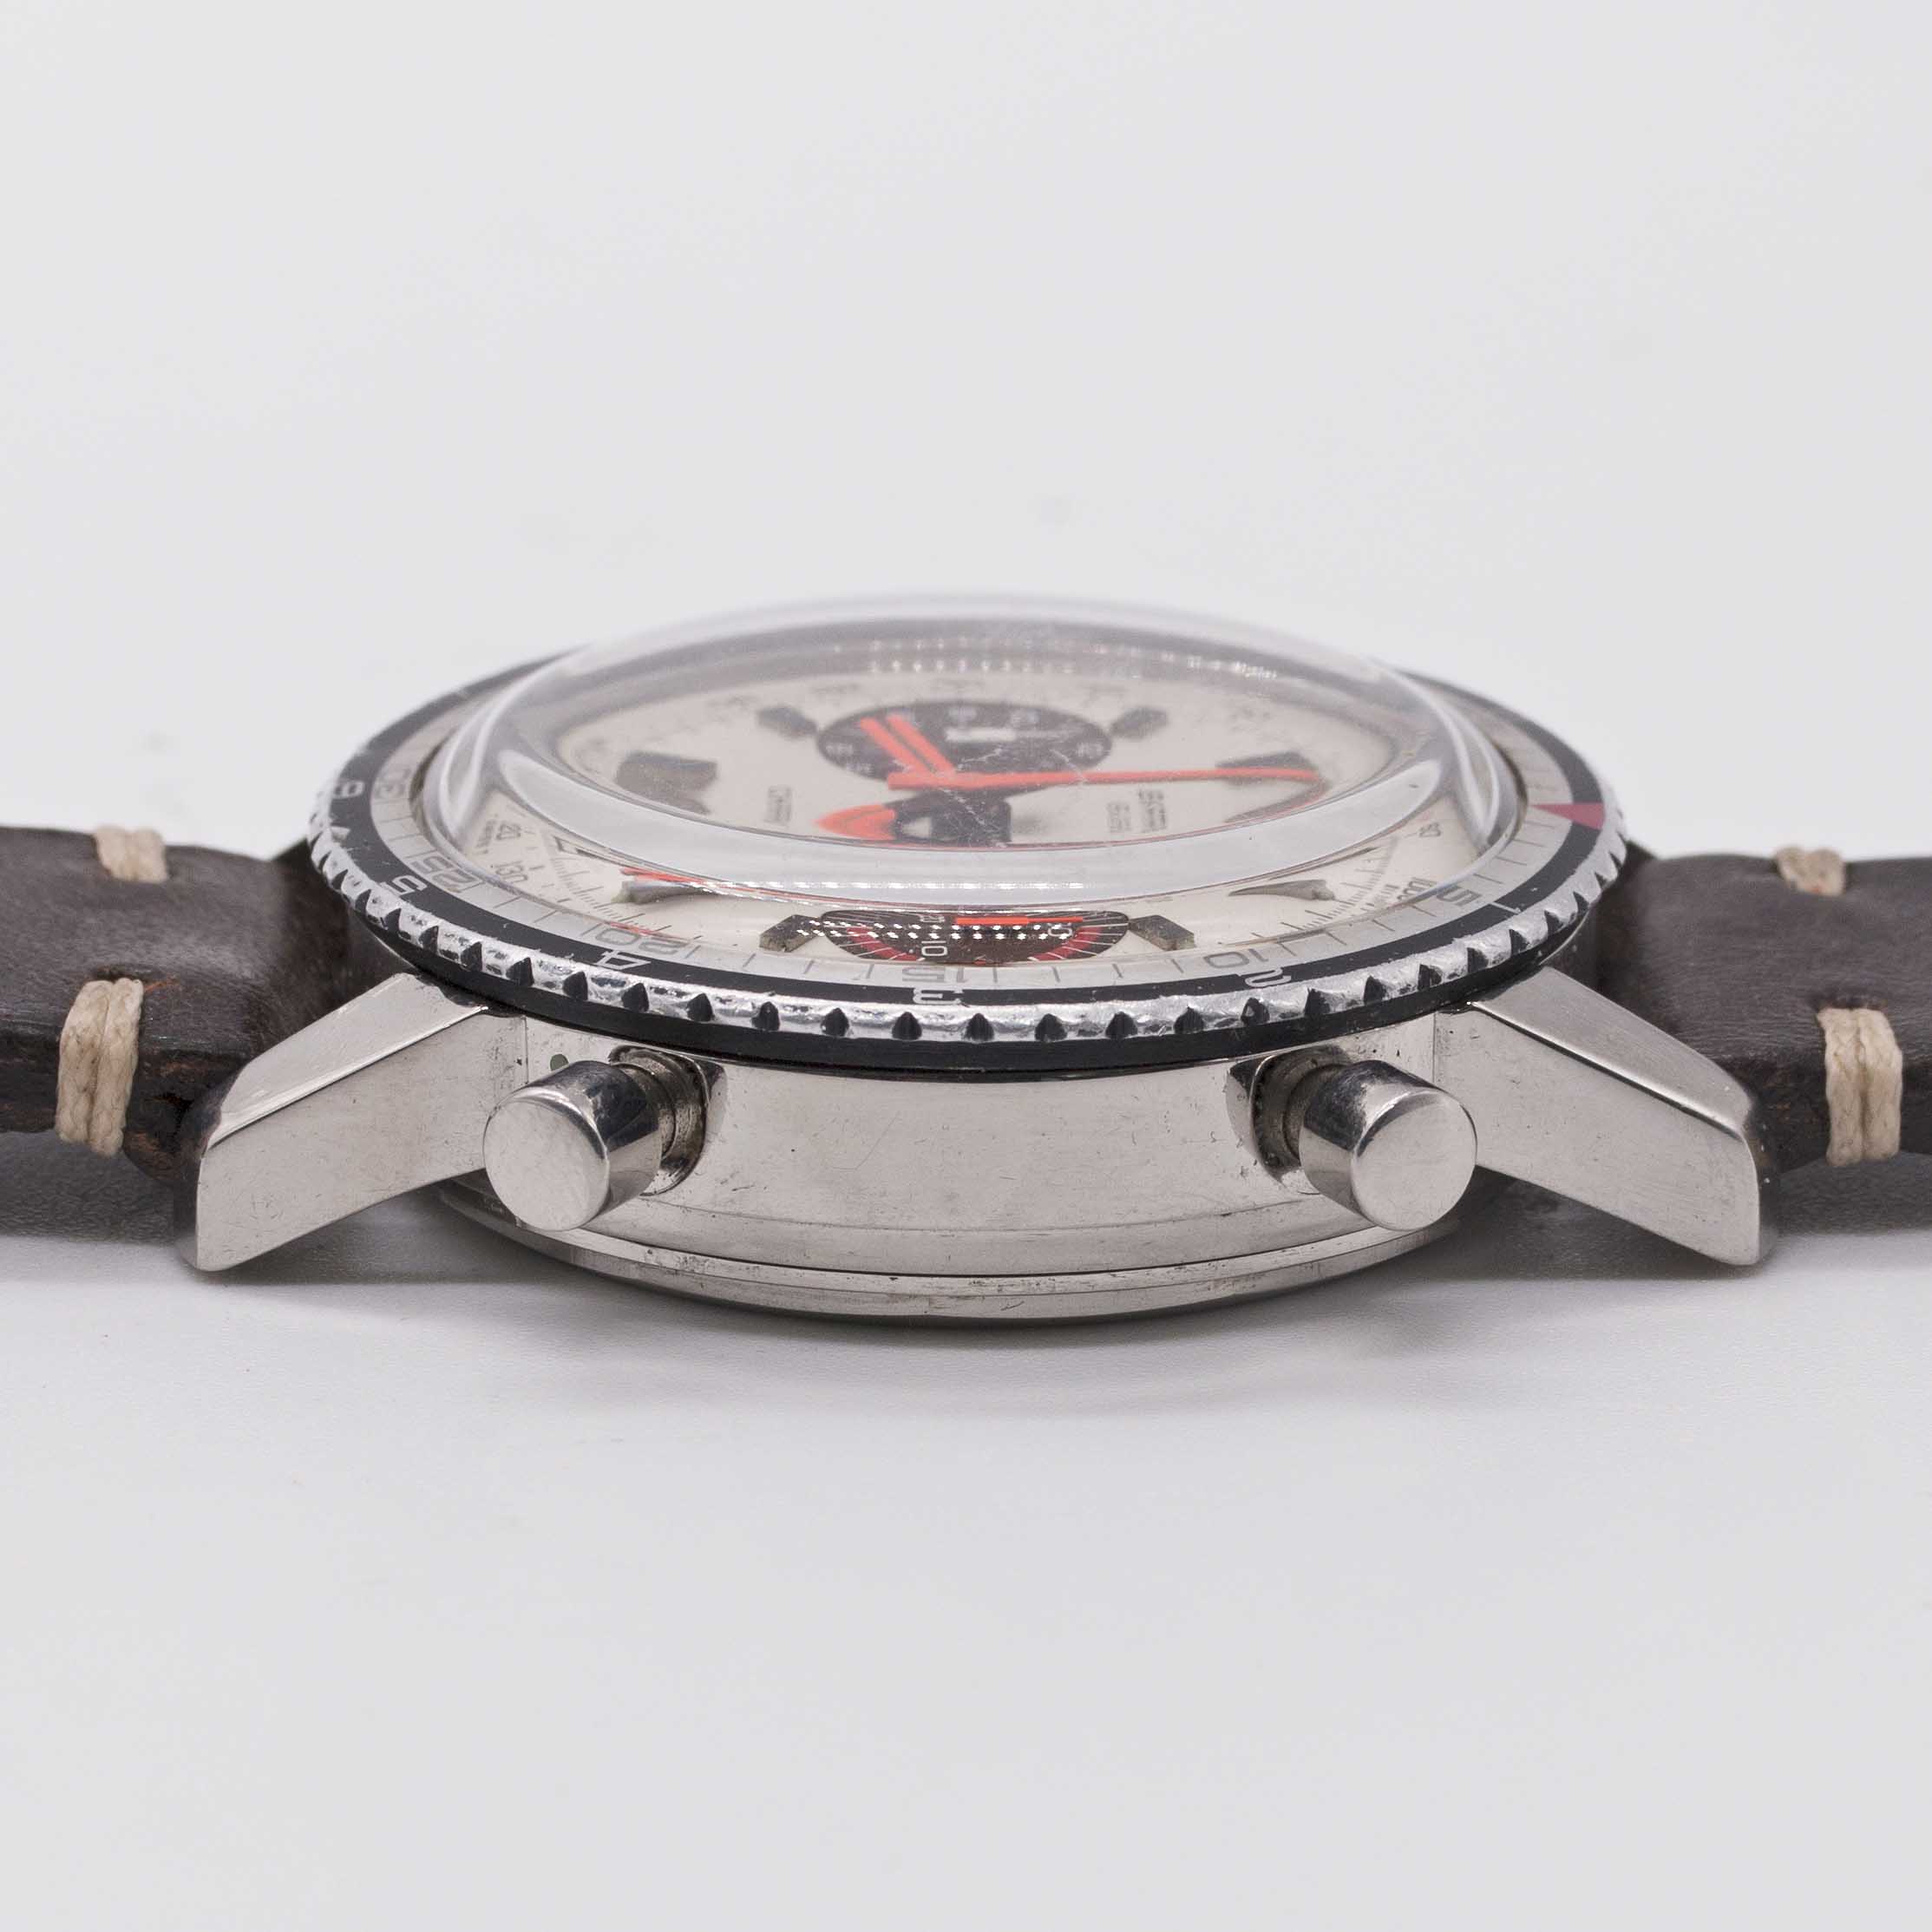 A GENTLEMAN'S STAINLESS STEEL BREITLING CHRONOMATIC CHRONOGRAPH WRIST WATCH CIRCA 1969, REF. 2110 " - Image 9 of 9